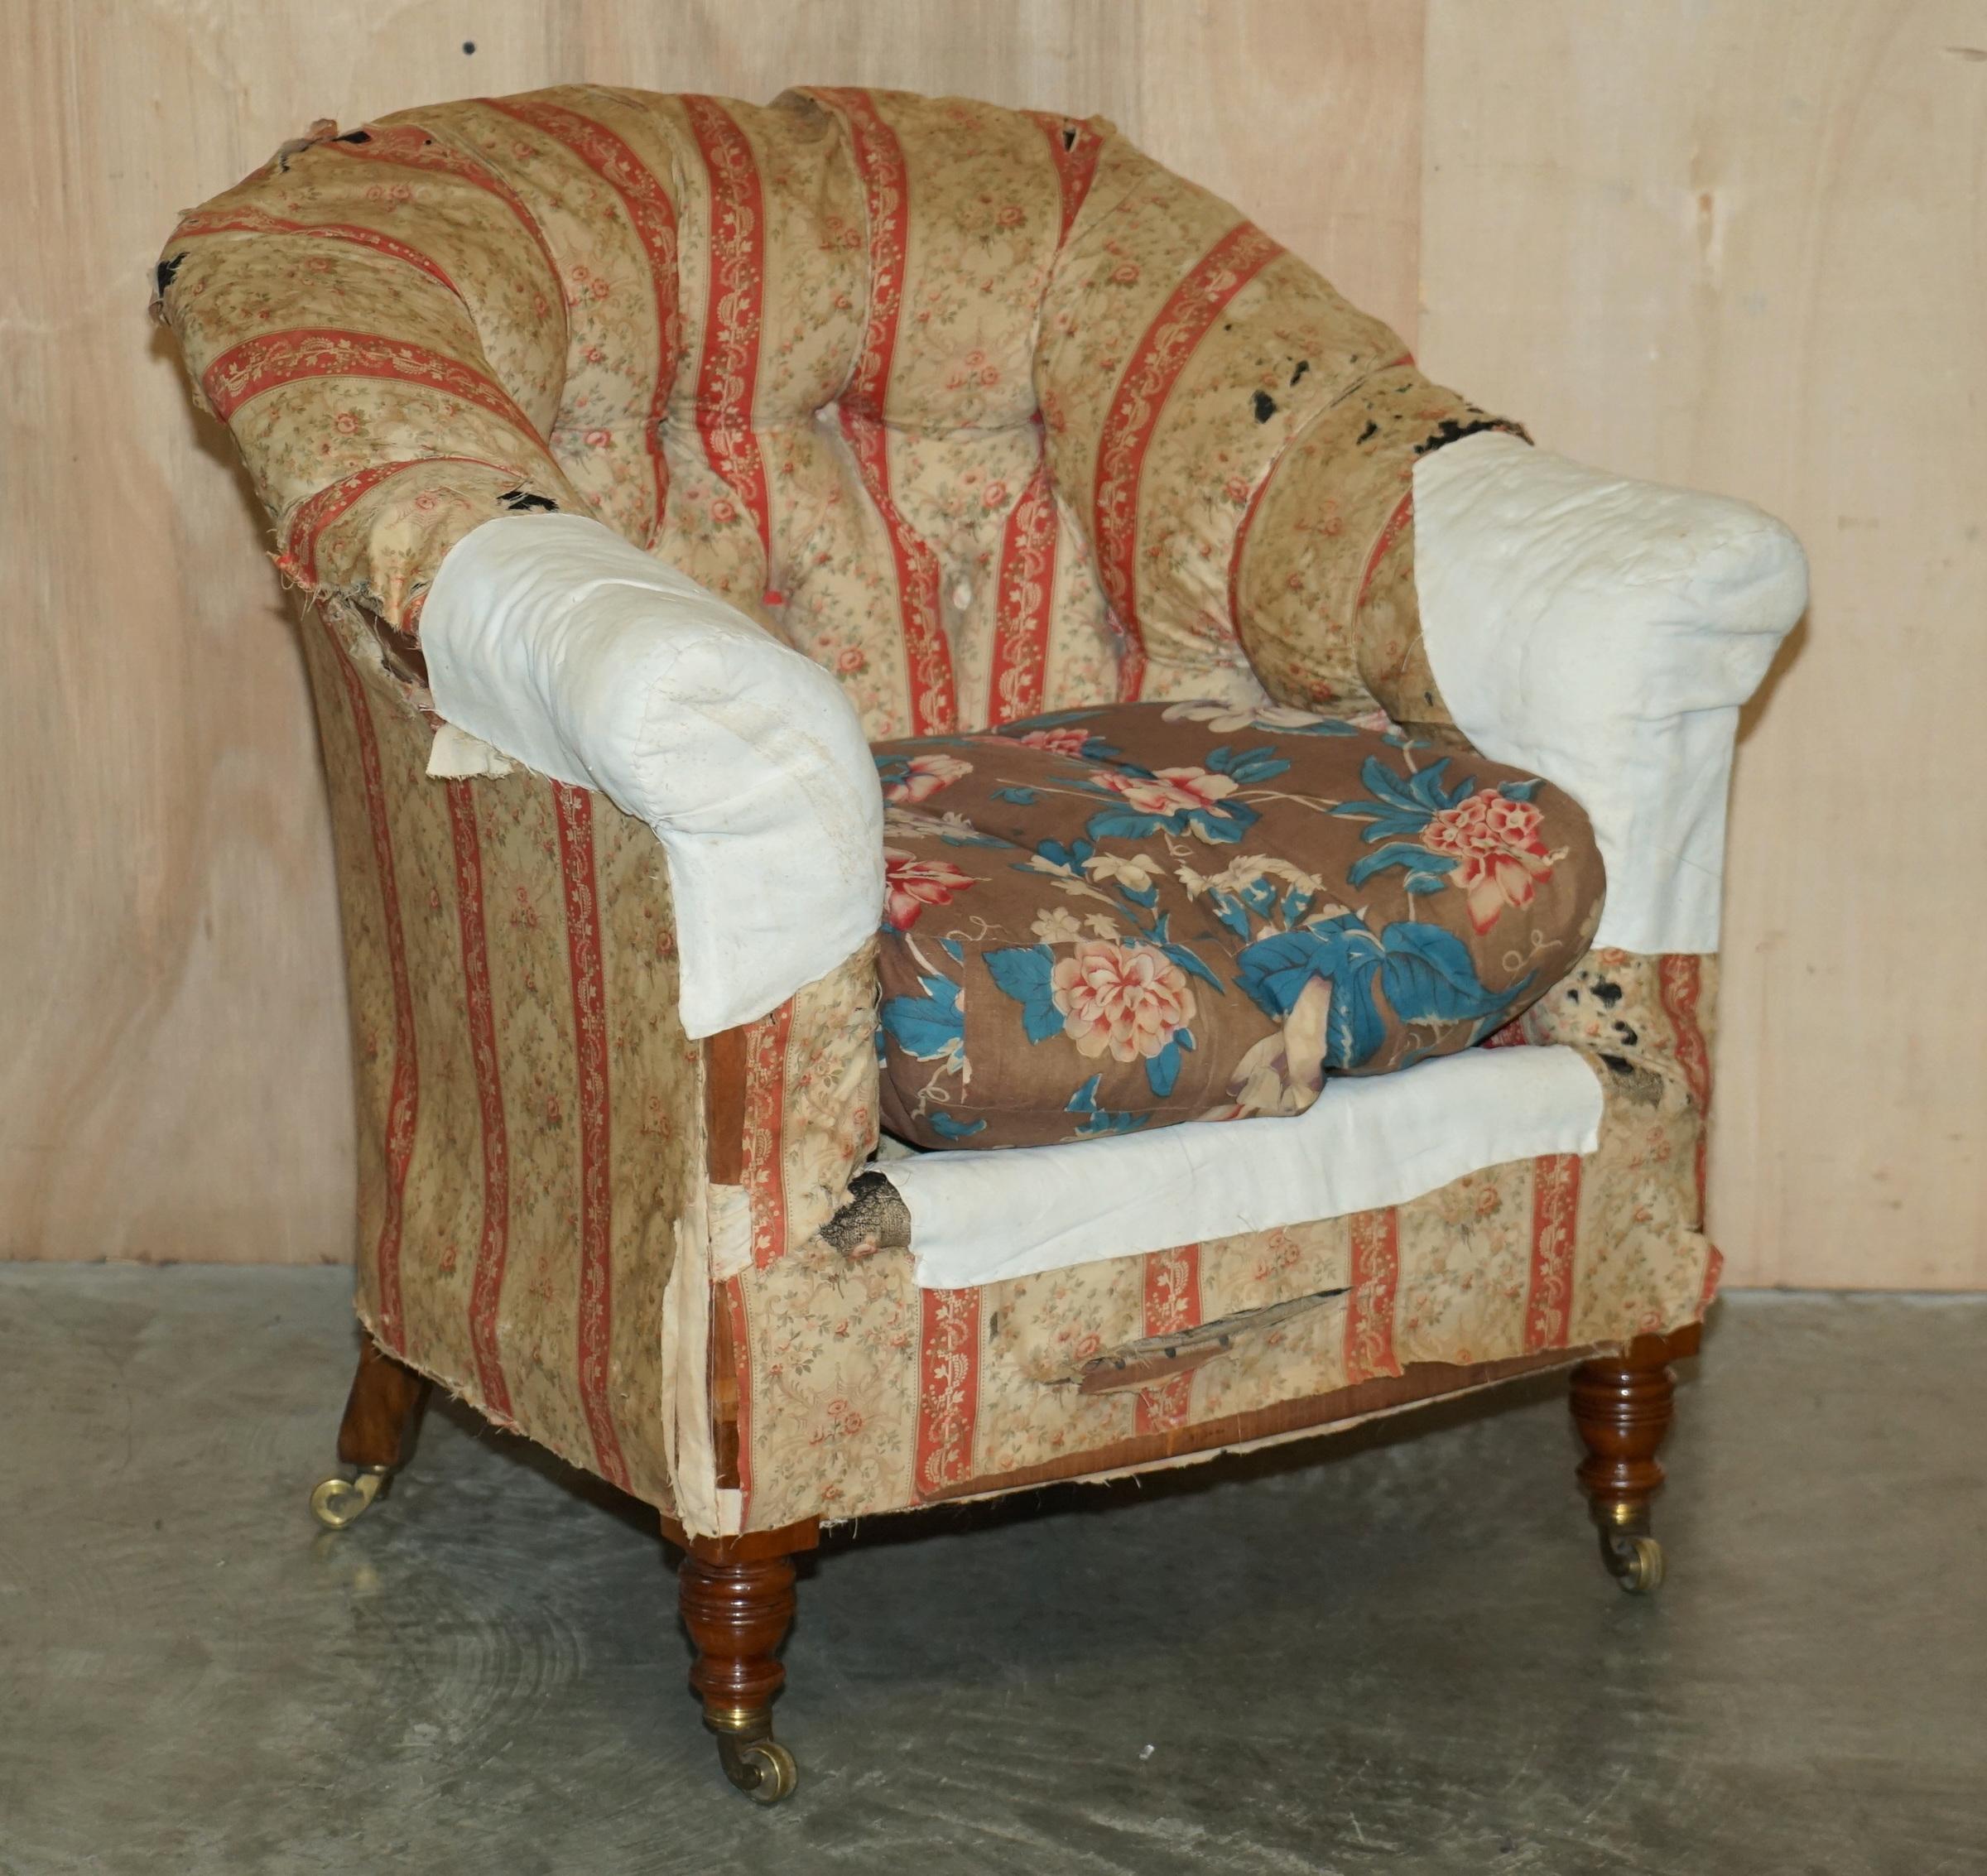 We are delighted to offer for sale this once in a lifetime opportunity to own, very rare original near pair of Howard & Son's Berners street armchairs in the original distressed ticking fabric circa 1870-1880

Never again will you be able to buy